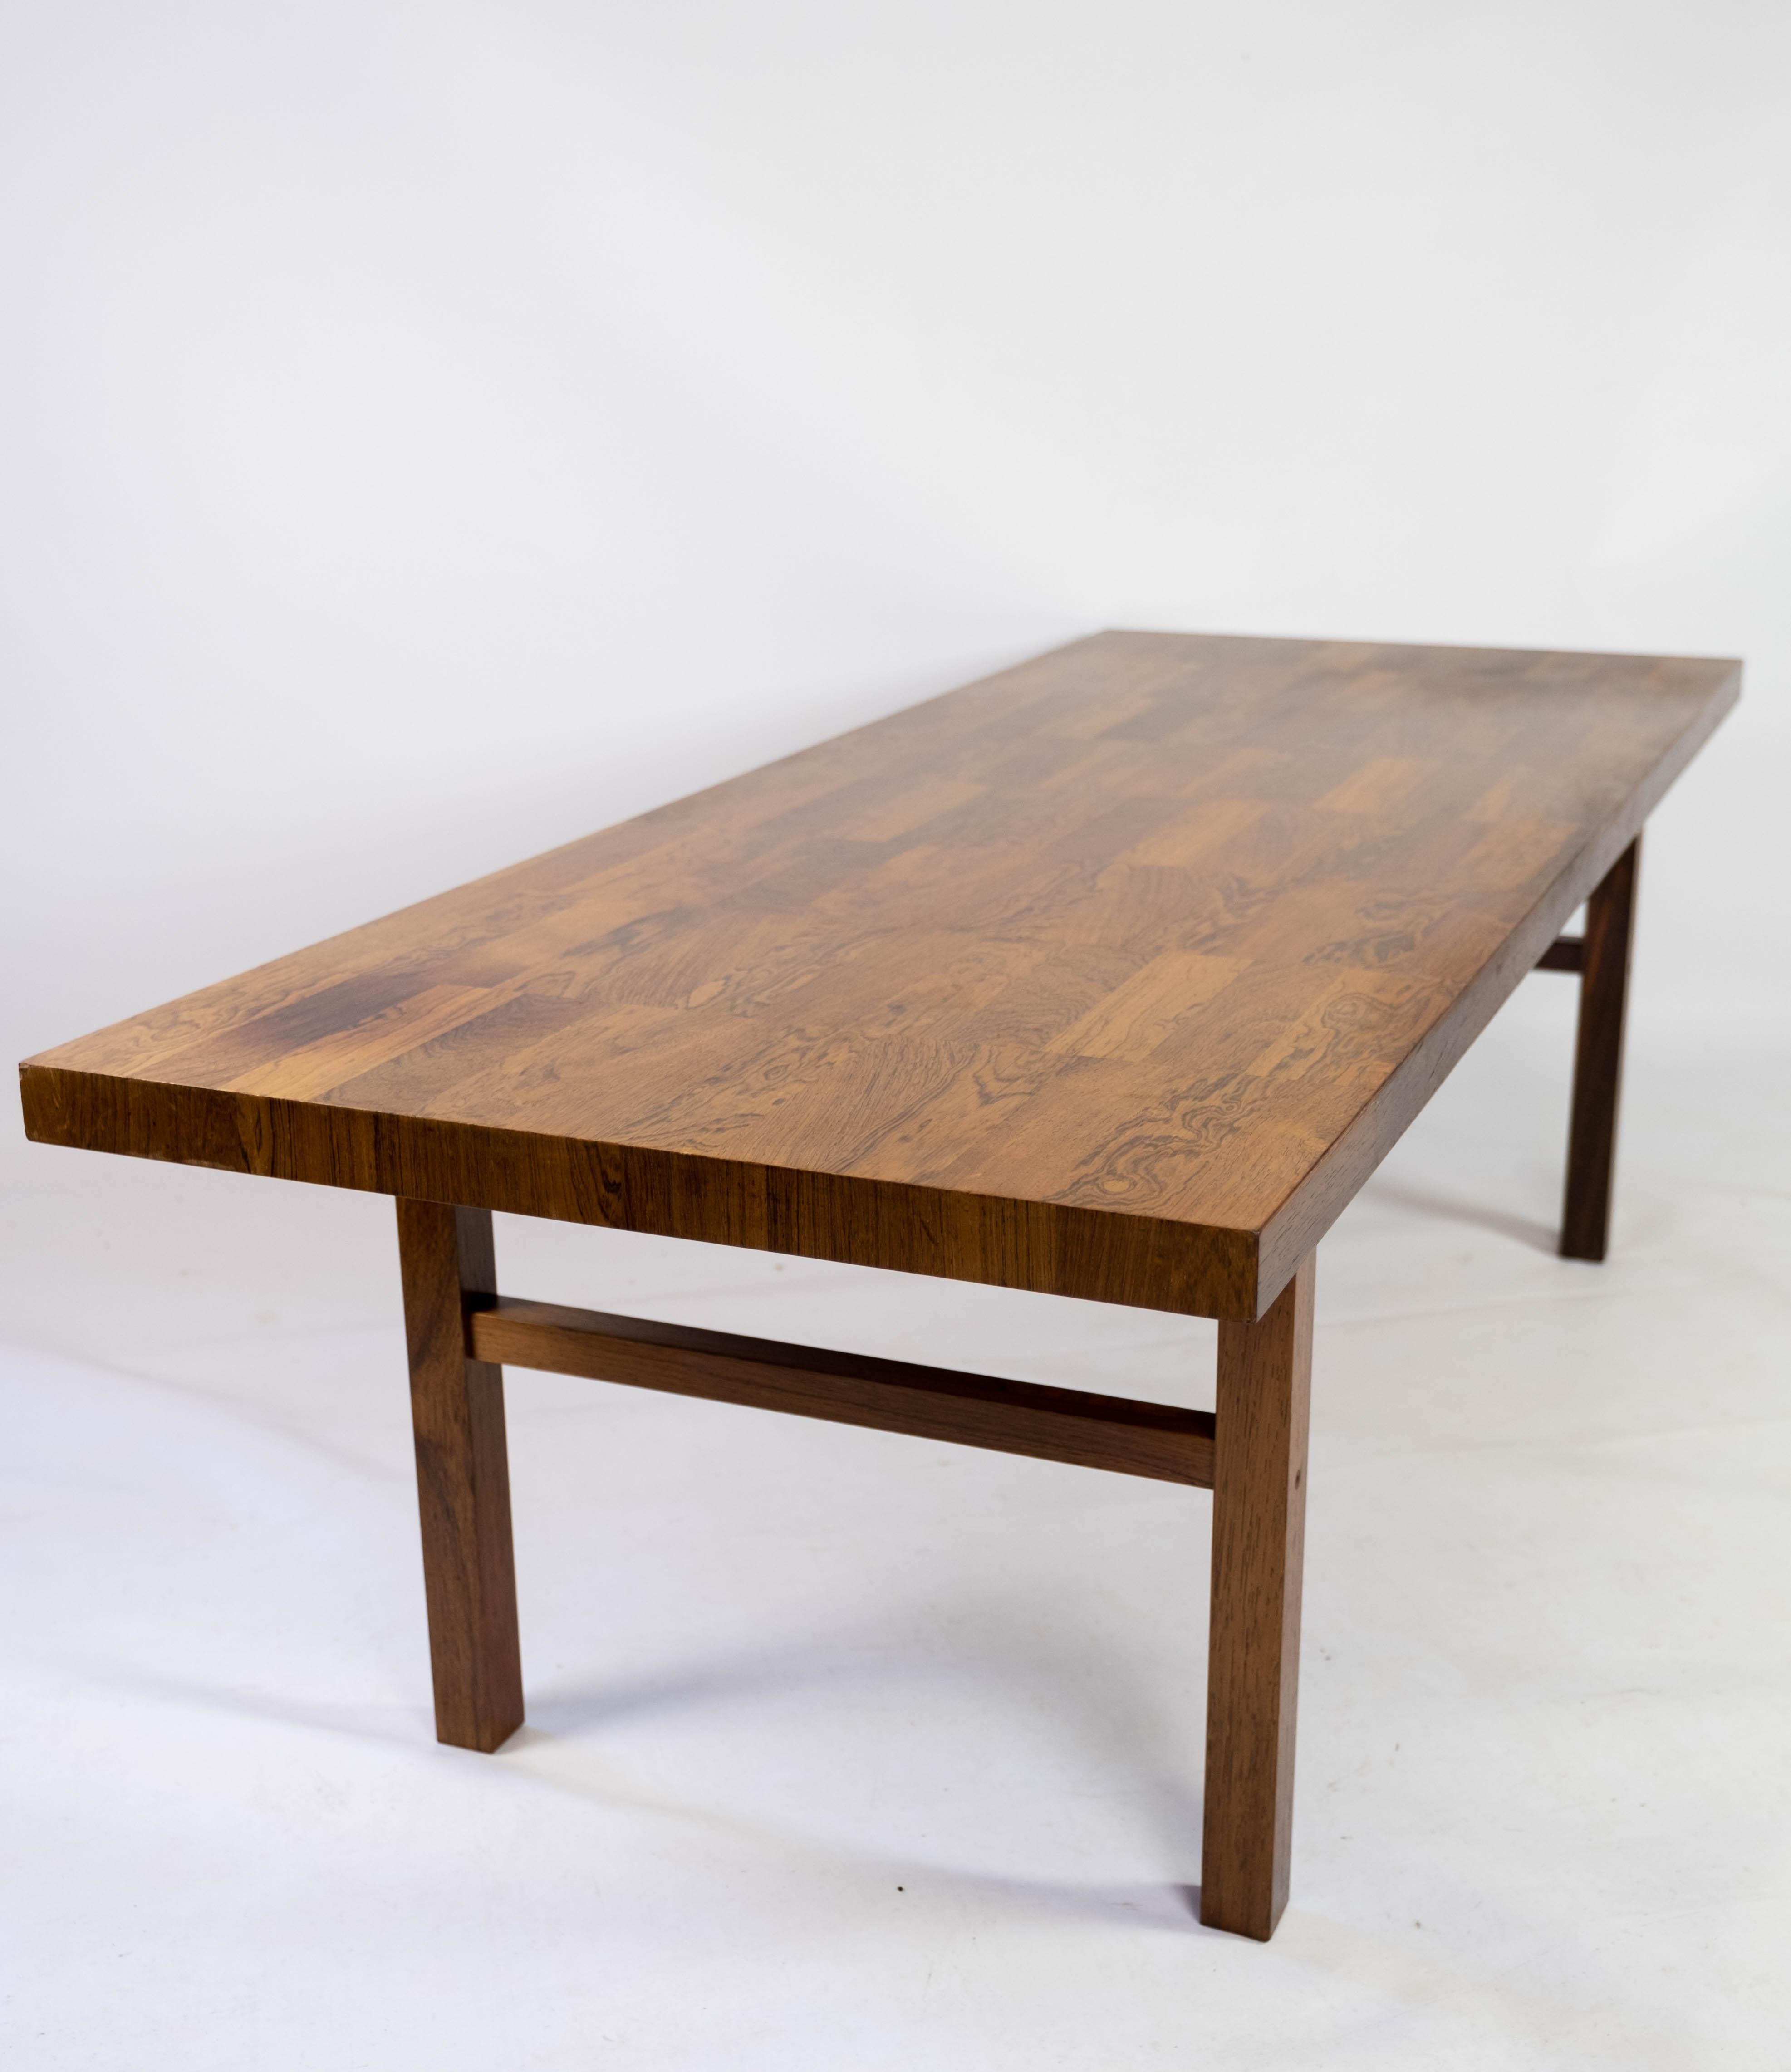 Coffee Table Made In Rosewood, Danish Design From 1960s In Good Condition For Sale In Lejre, DK